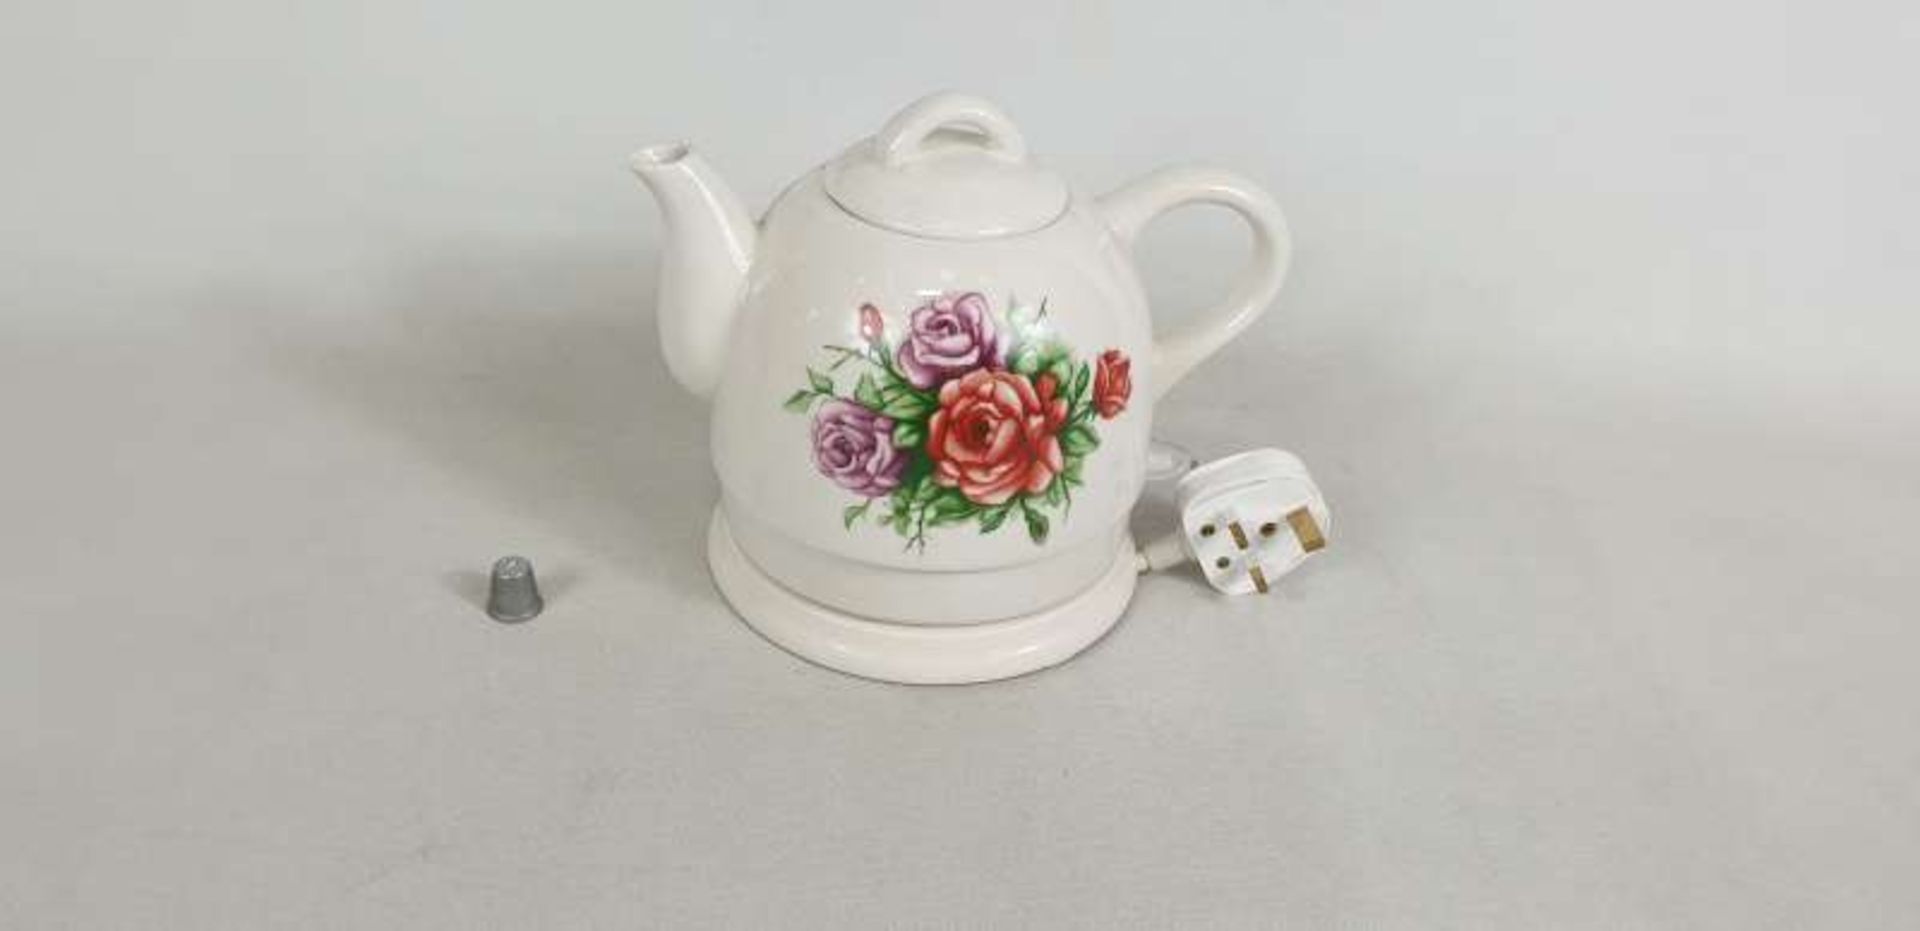 20 X CERAMIC KETTLES WITH FLORAL DETAIL IN 5 BOXES